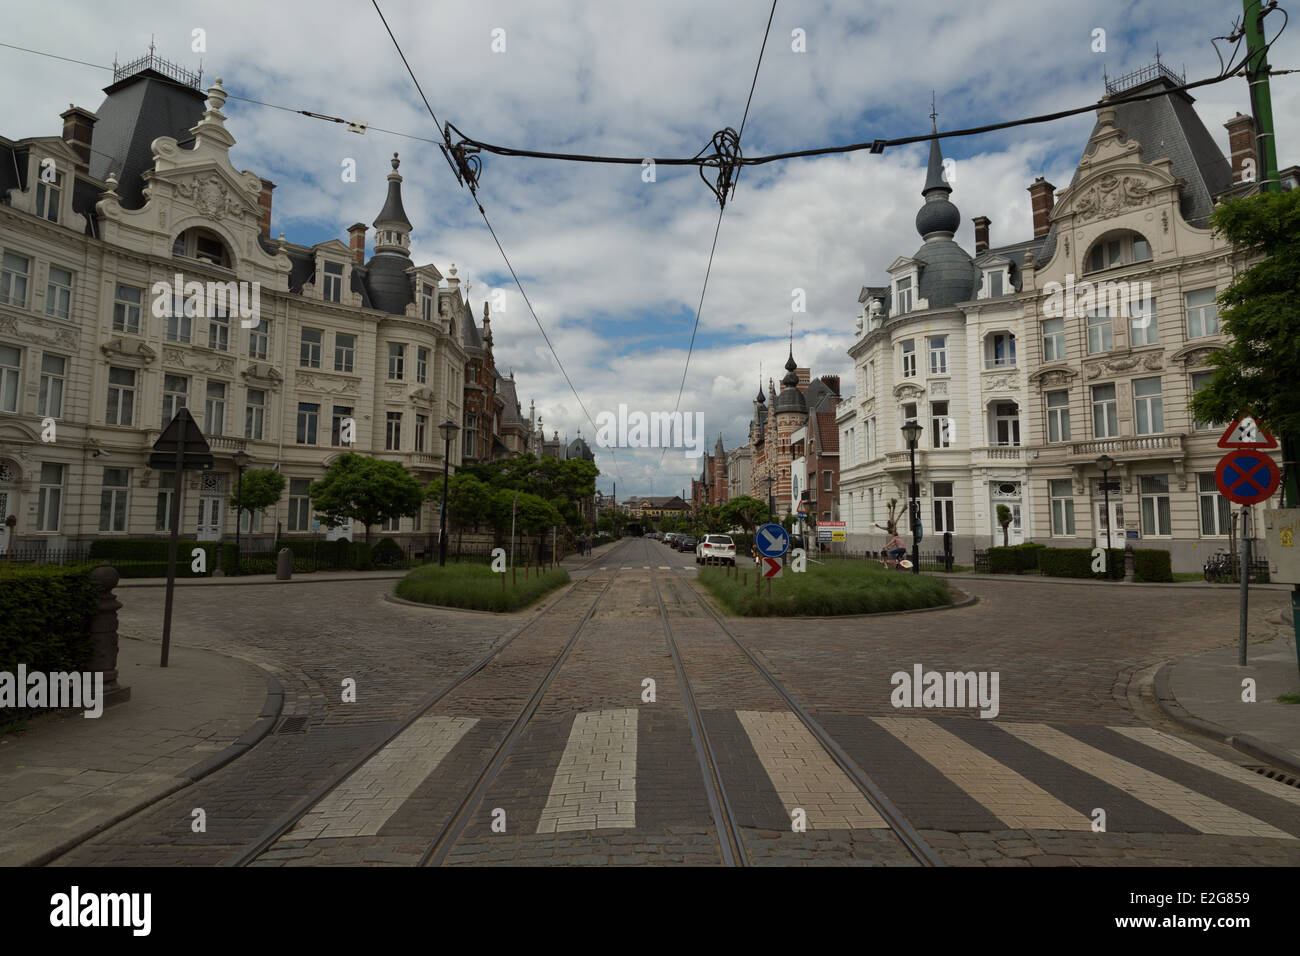 A photograph of a street scene with tram lines in Antwerp, Belgium. The Zurenborg neighborhood is a little off the beaten track. Stock Photo